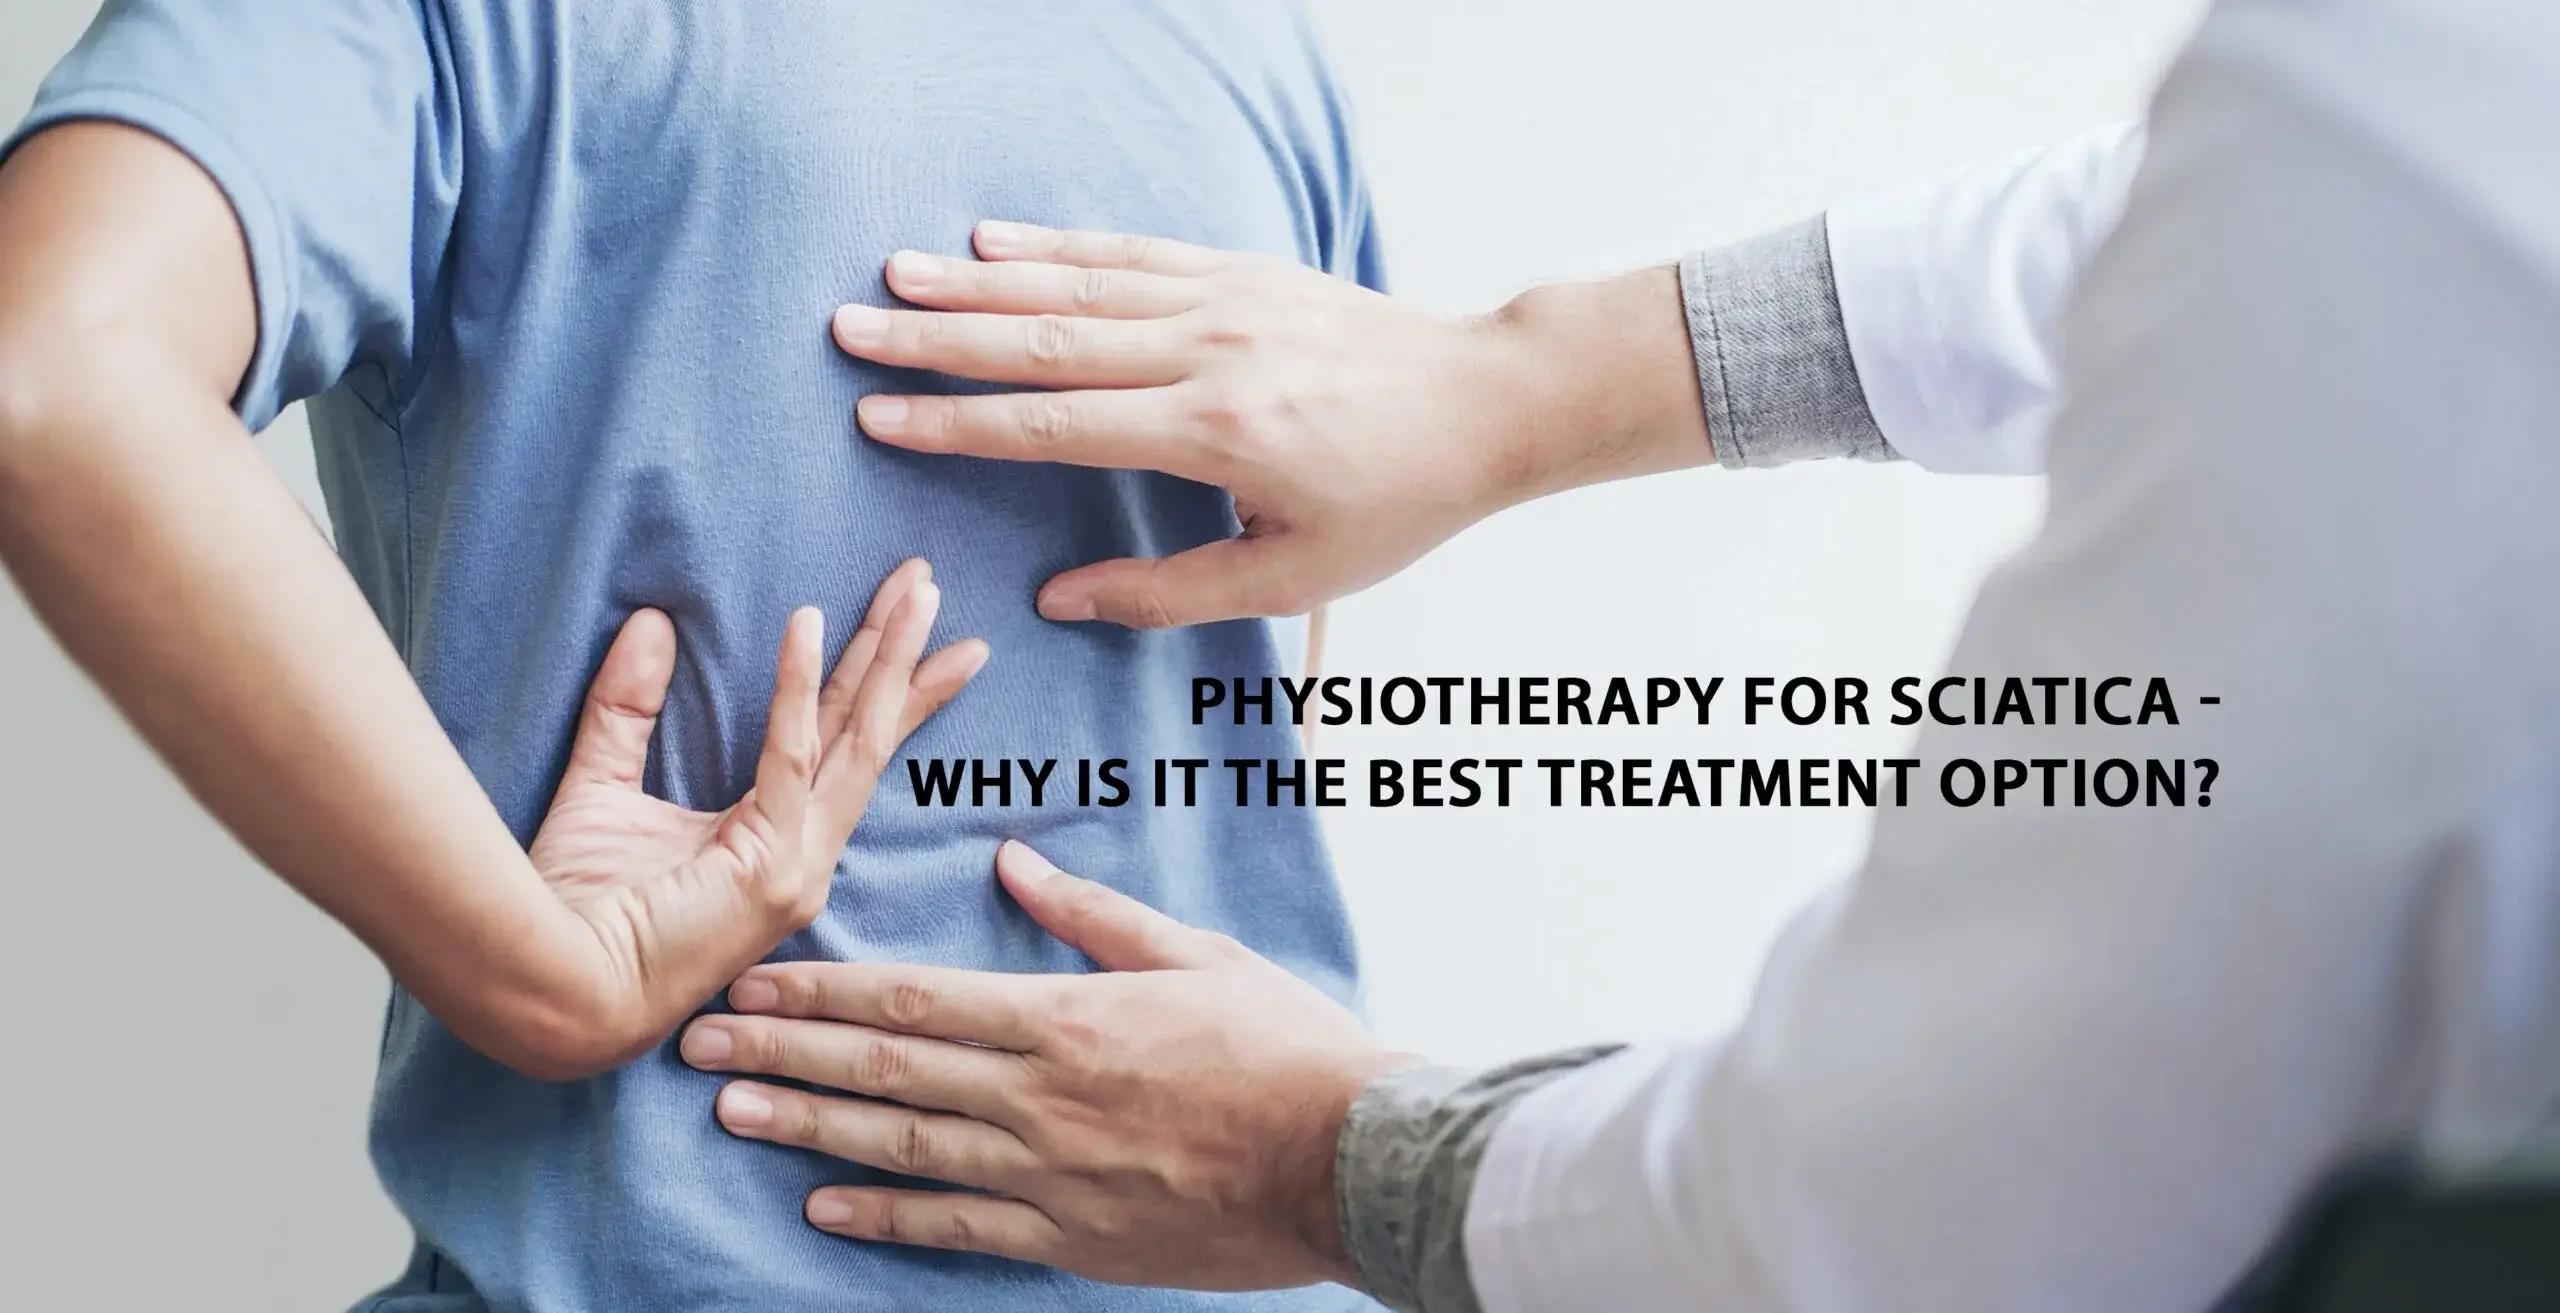 https://www.miracleshealth.com/assets/blog/assets/uploads/blog/Physiotherapy for sciatica - Why is it the best treatment option